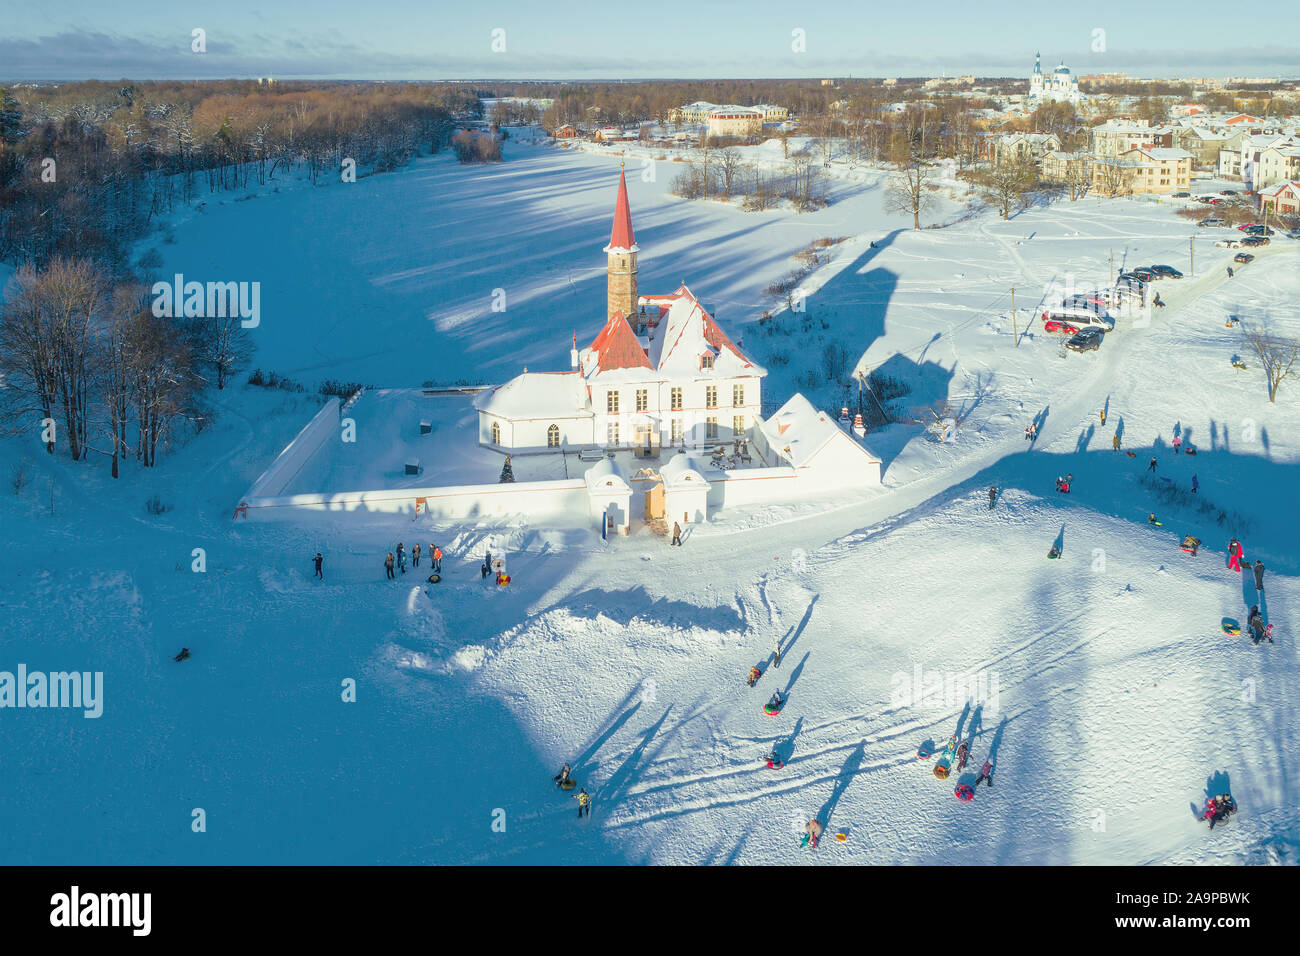 GATCHINA, RUSSIA - JANUARY 12, 2019: January day at the Priory Palace (aerial photography) Stock Photo